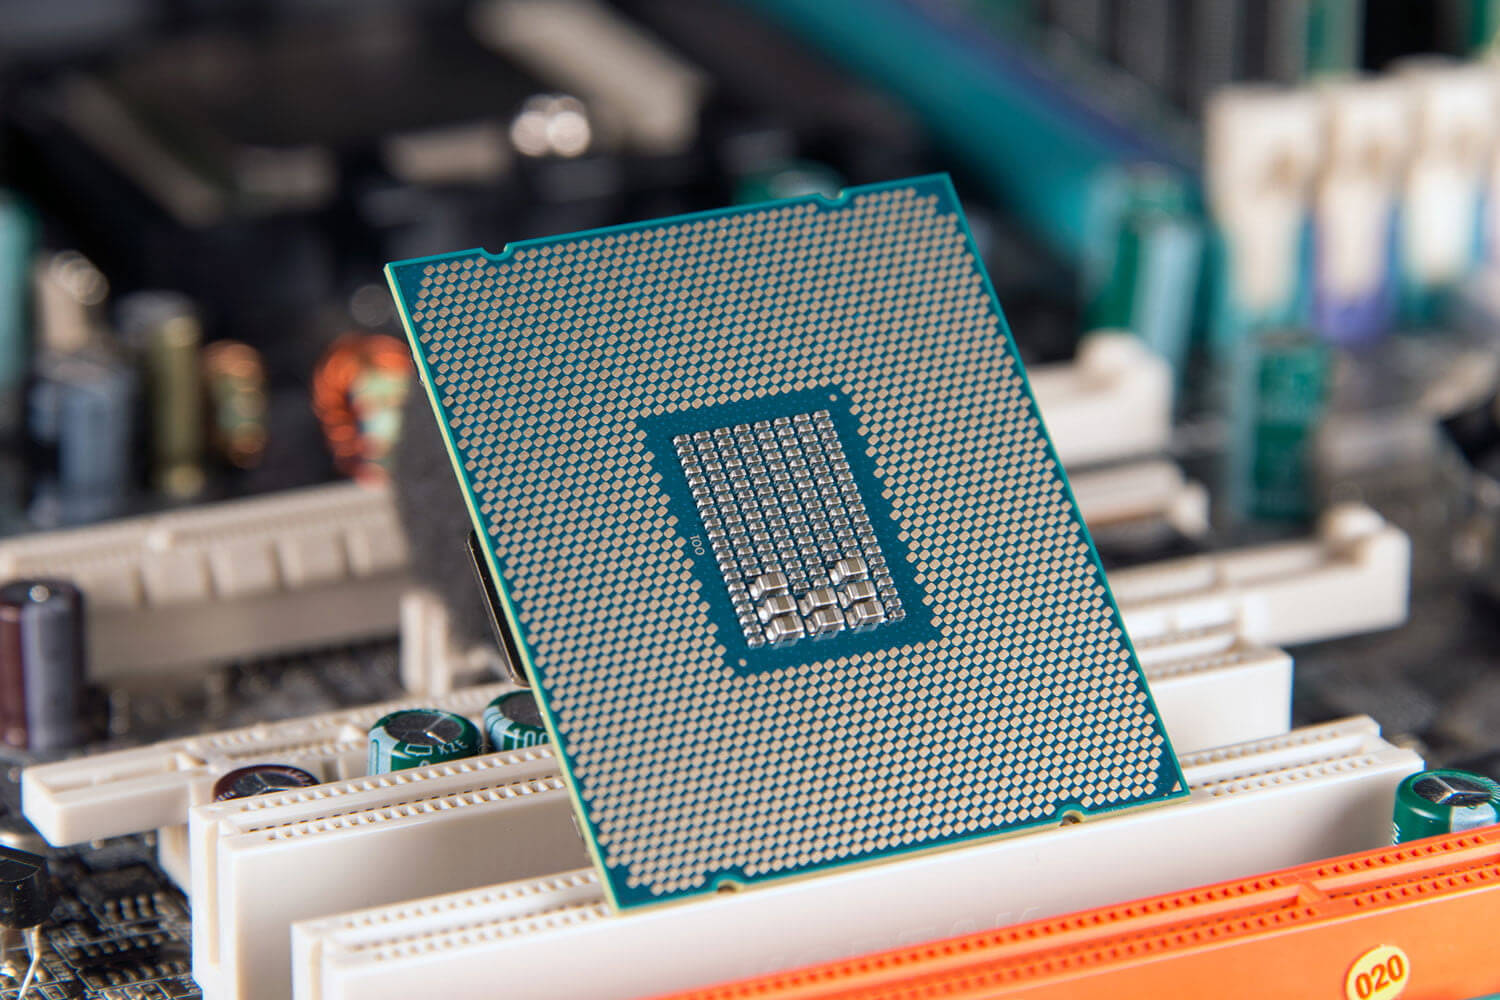 Intel CPUs have another bug that can leak sensitive information